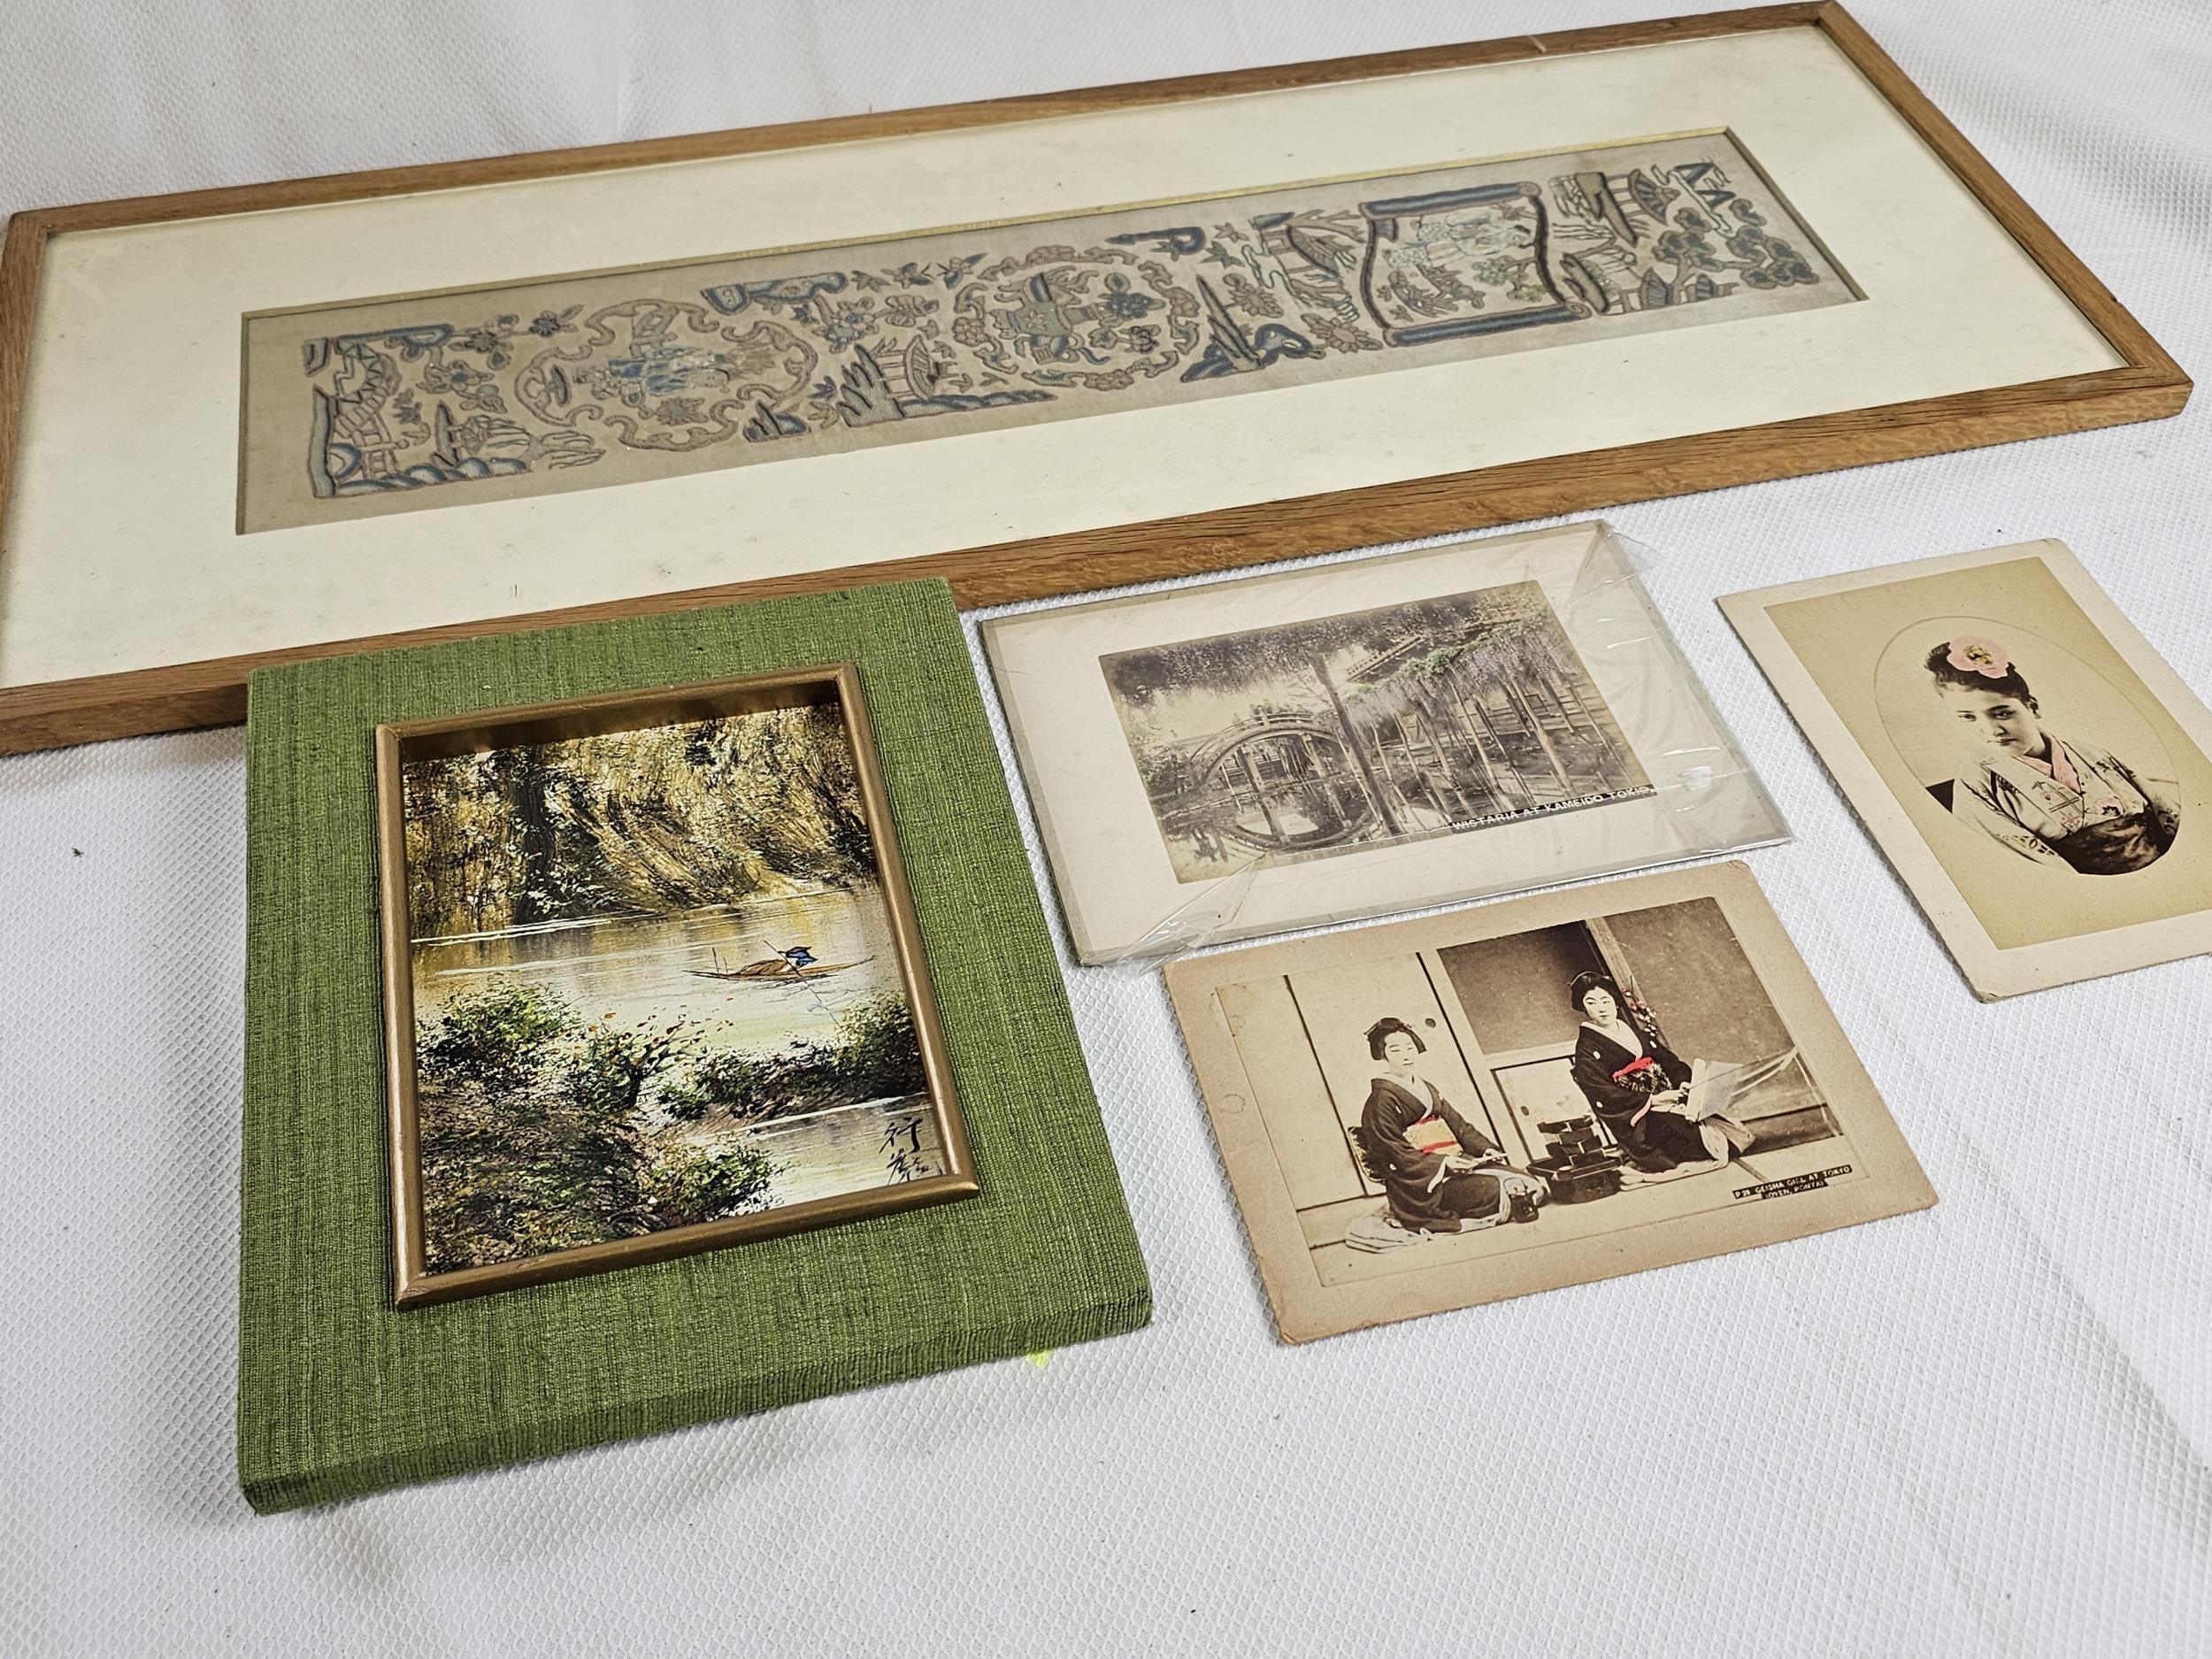 A Chinese silk embroidery, glazed and framed, a Chinese watercolour and old photographs. Silk is H. - Image 2 of 5